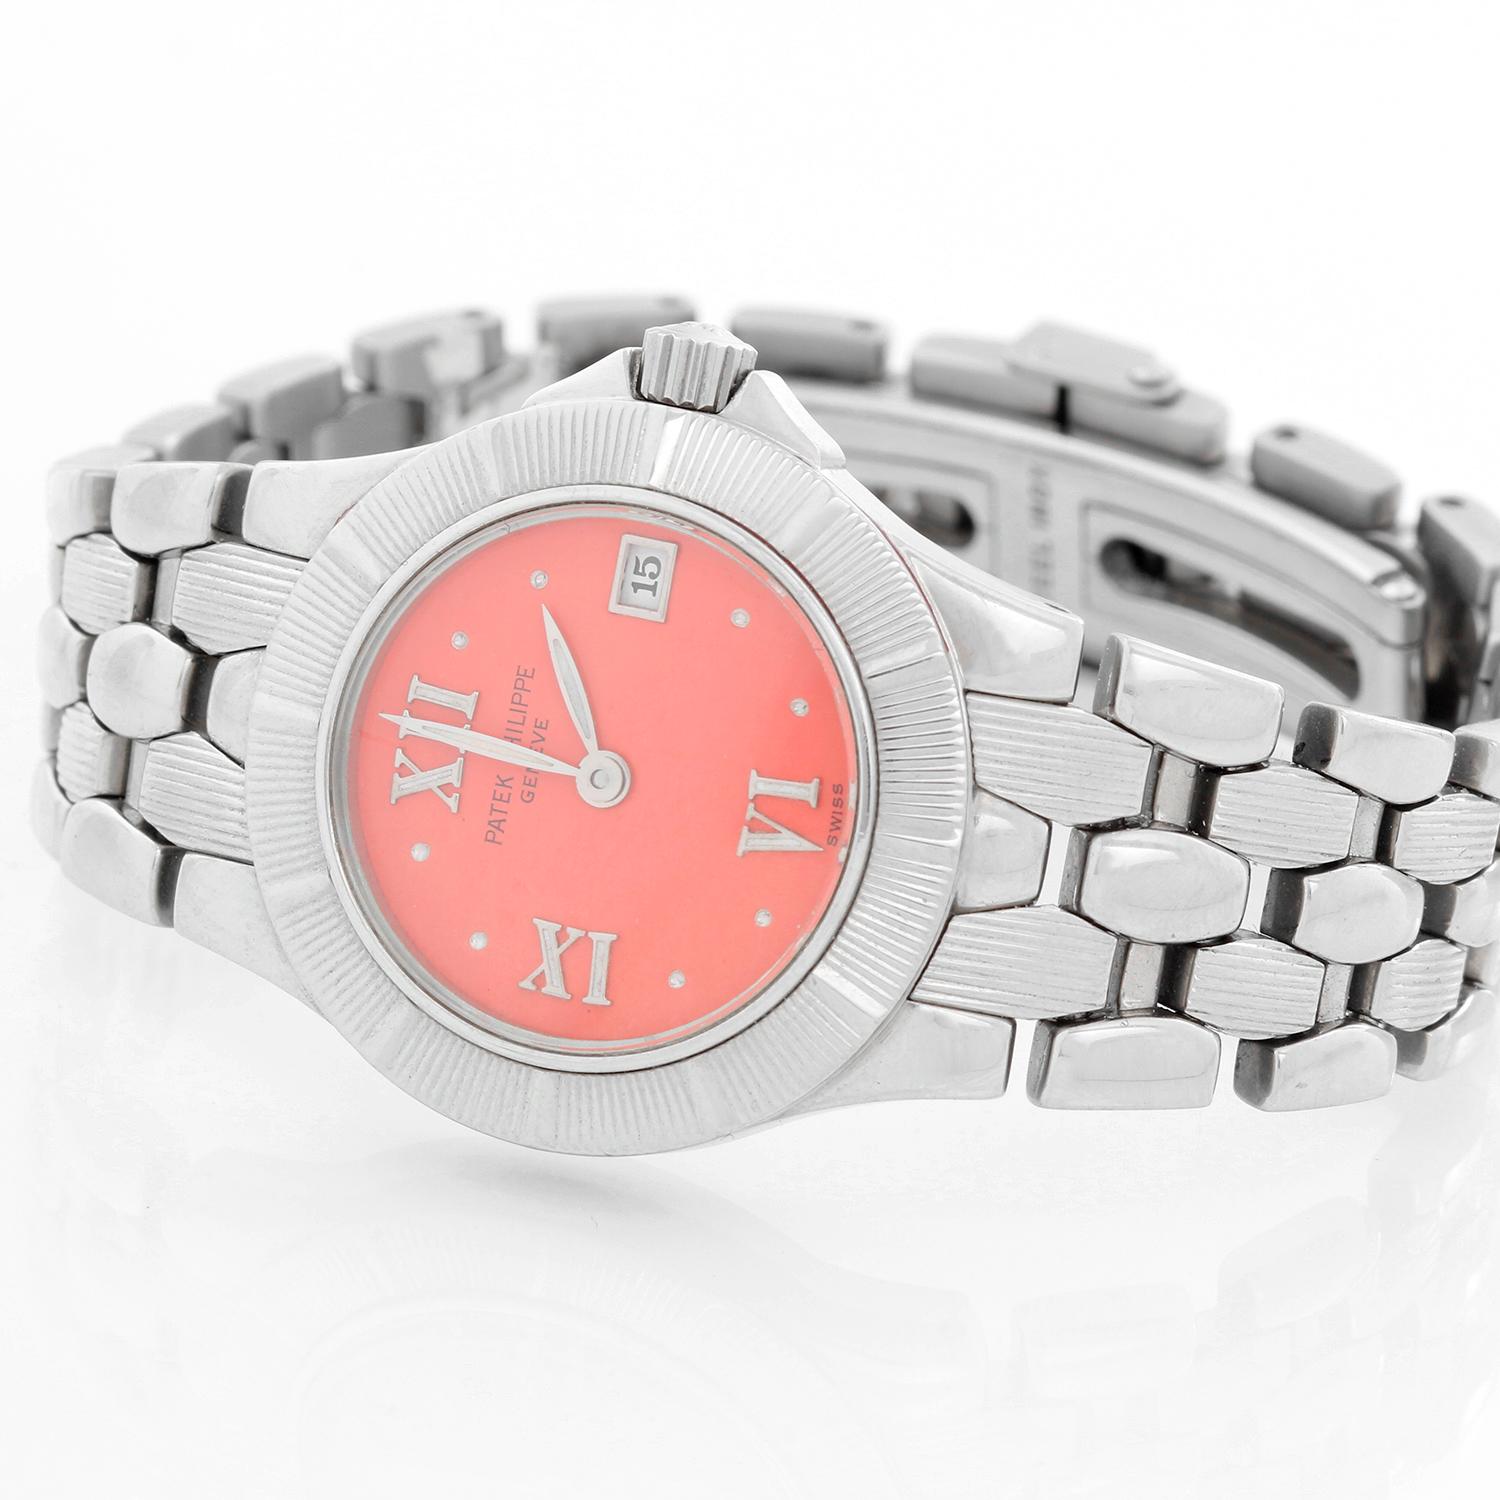 Patek Philippe Neptune Ladies Steel Watch 4880 / 1A - Quartz. Stainless steel case. Custom Pink colored dial with Roman numerals; date at 3 o'clock. Stainless steel Neptune bracelet - will fit a 6 1/4 inch wrist. Pre-owned with Patek Phlippe box.